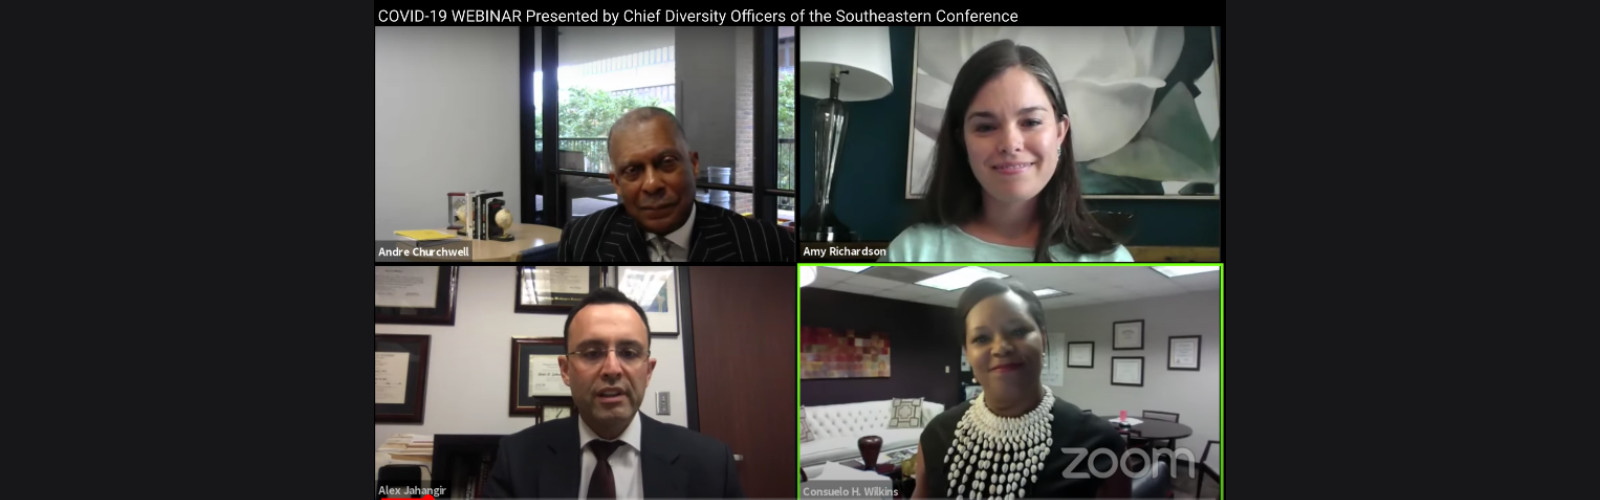 Vanderbilt medical experts discuss health disparities, inequities during COVID-19 on webinar co-hosted with SEC chief diversity officers